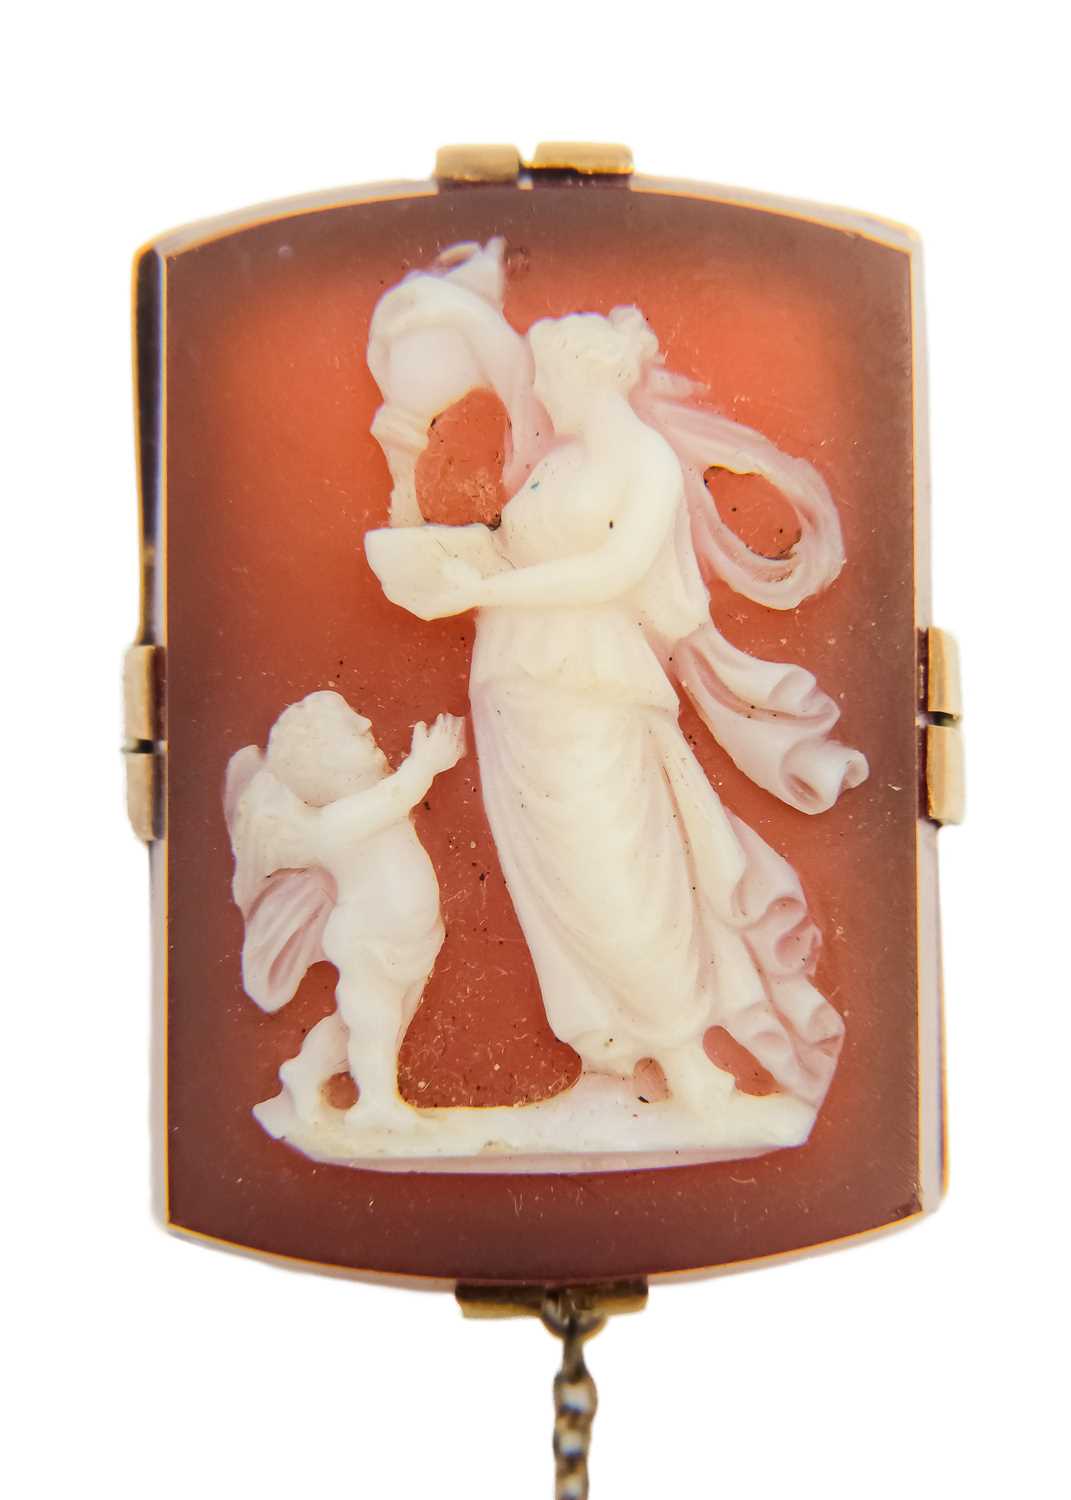 A fine 19th century agate cameo, rose gold mounted, brooch depicting cupid and Venus. - Image 3 of 3